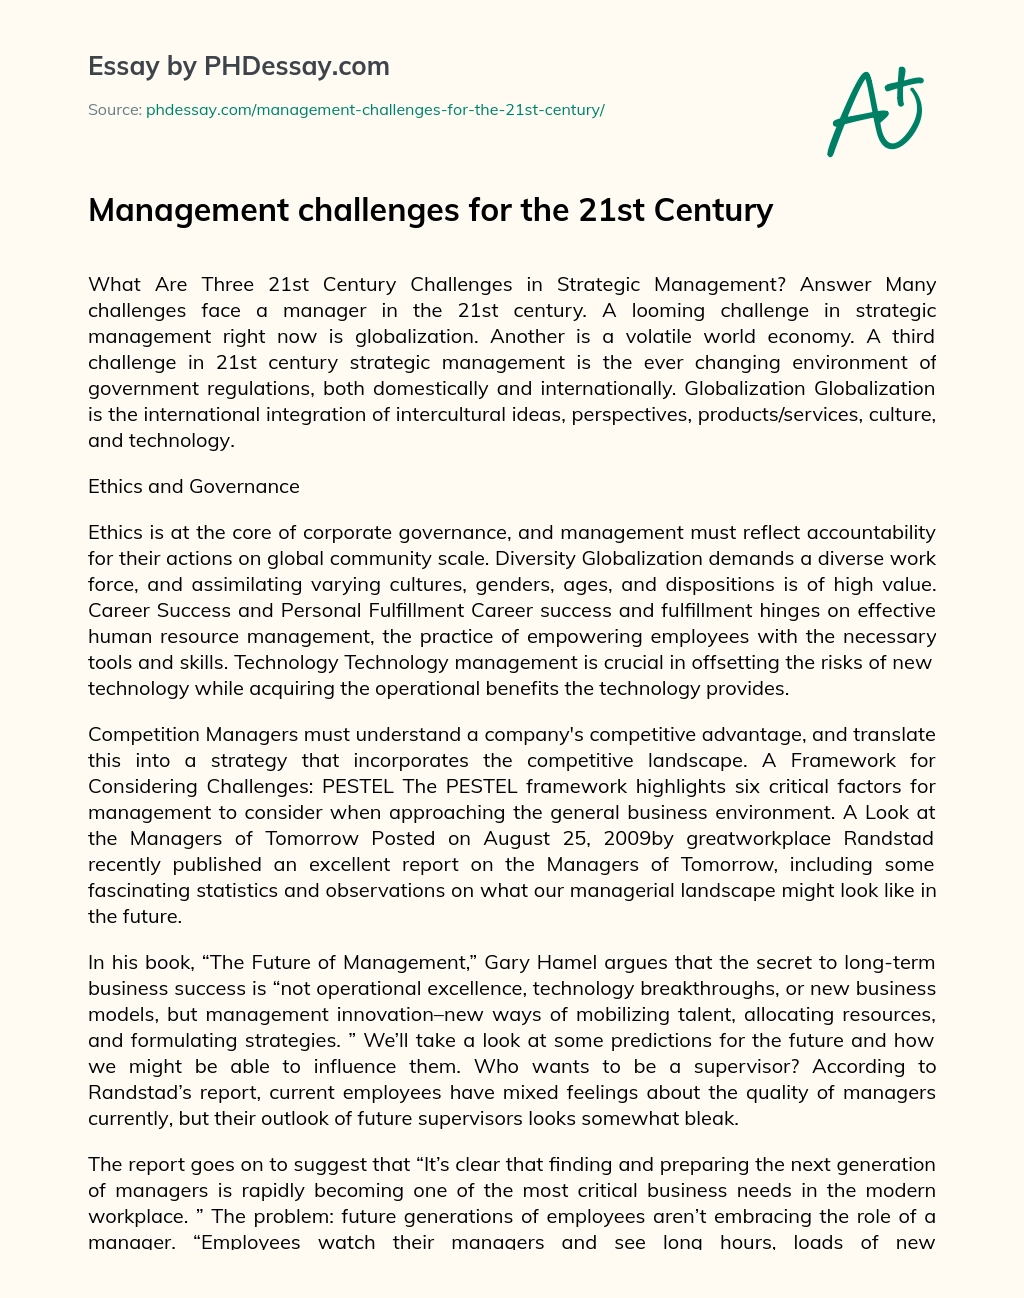 Management challenges for the 21st Century essay